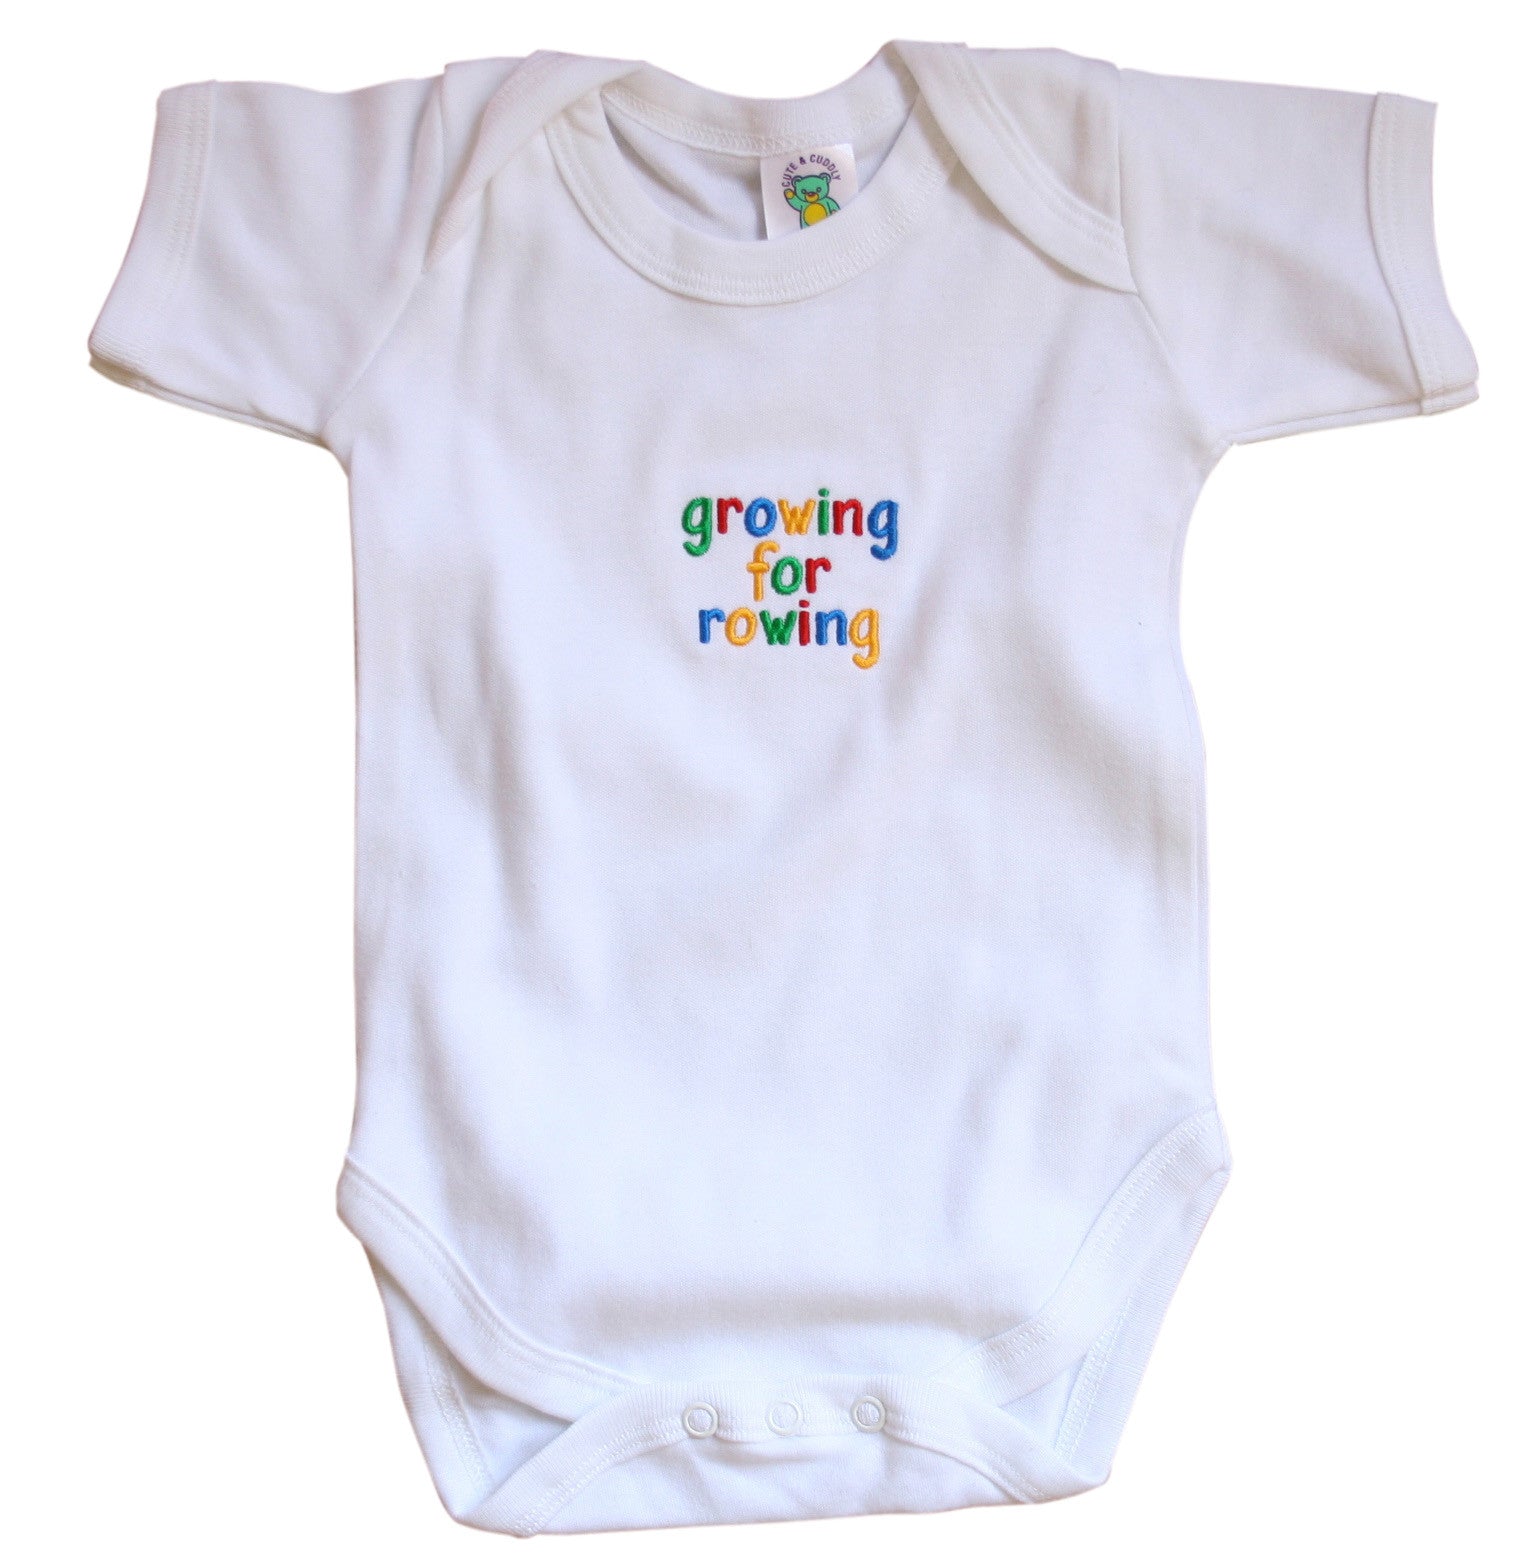 Growing for Rowing vest